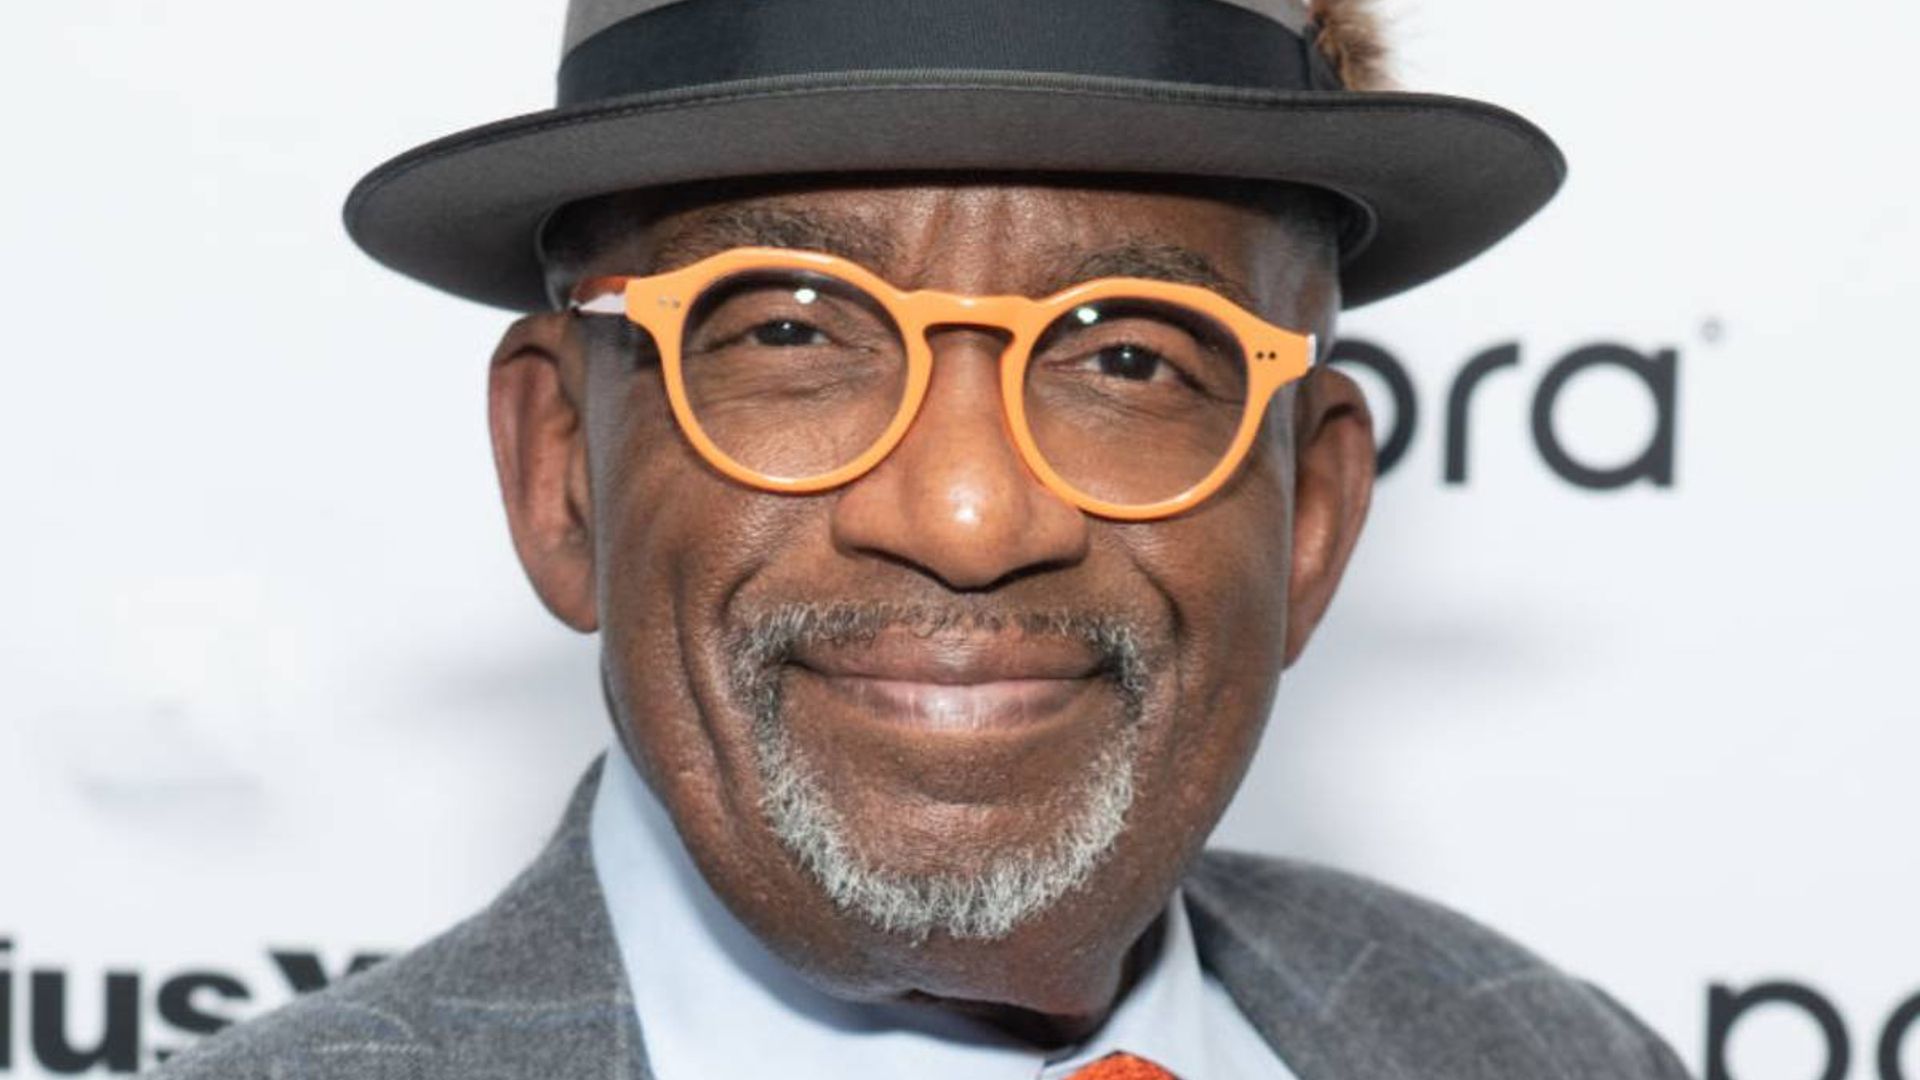 Today's Al Roker breaks hearts with touching tribute to late parents